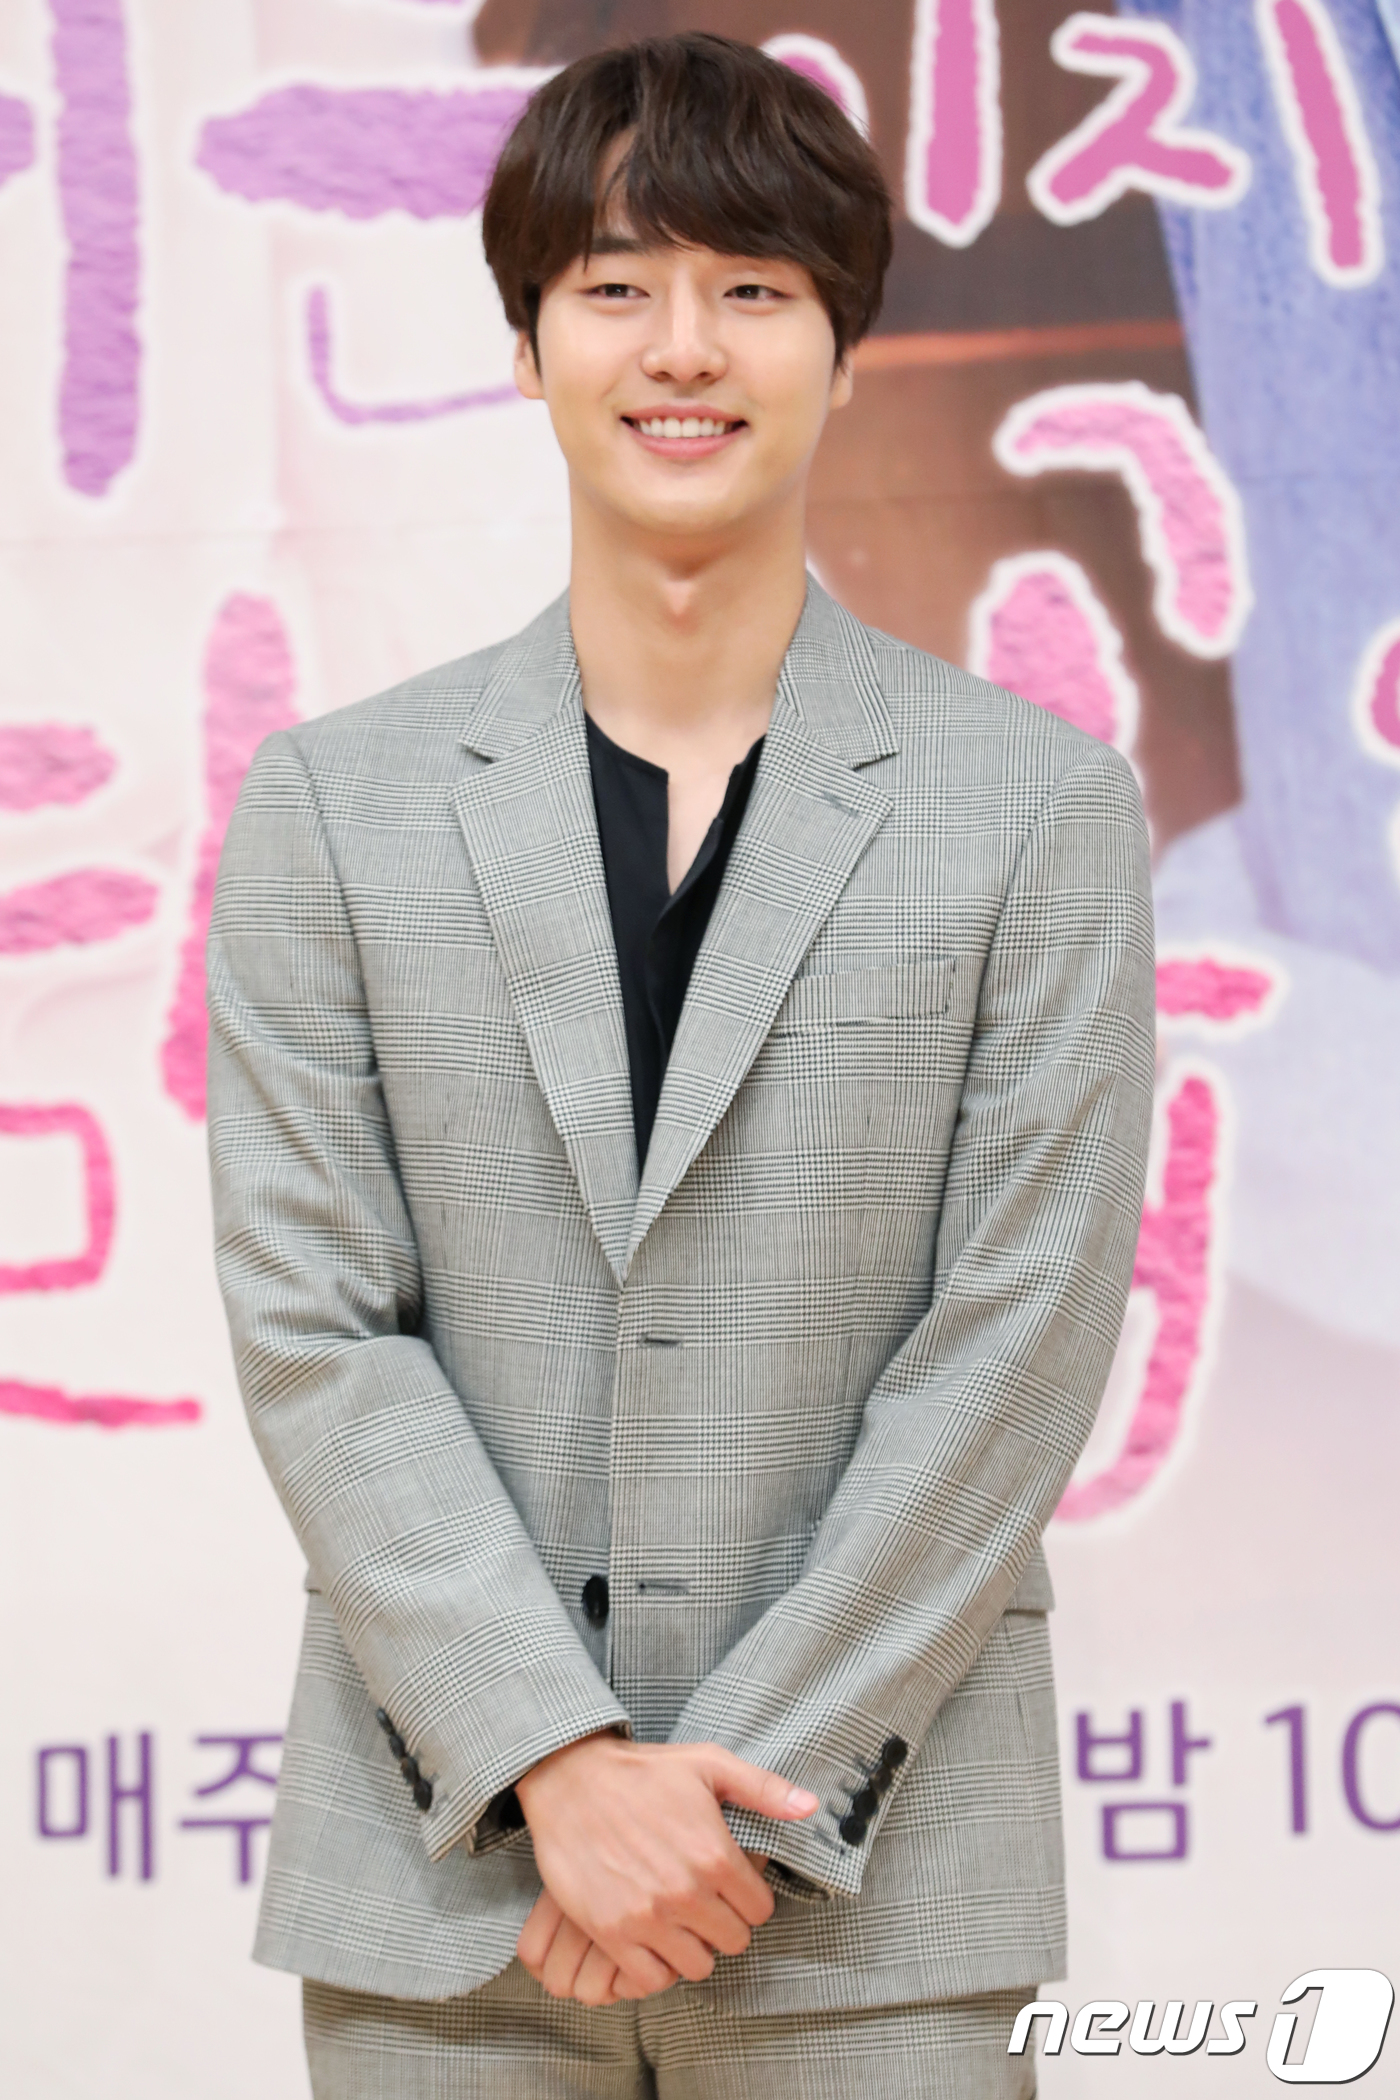 As a result of the 11th coverage, Yang Se-jong is being proposed and reviewed to appear in the new drama My Europe (playplayplay by Chae Seung-dae/director Kim Jin Won) which will be organized by JTBC.My Europe is a historical drama depicting the stories of three men and women who tried to keep love in the whirlwind of history.The Age of Sensation: The Birth of a Tsain and Master - Noodle God Chae Seung-dae, author of the film, directed by Kim Jin Won PD, A Good Man Without the World, Remembering You, and Just Love You.Yang Se-jong was offered the role of Seo Hui, the son of a longevity sword who commanded the north under Lieutenant in My Europe.After successfully completing the SBS drama Thirty but Seventeen, which ended in mid-September, I was interested in my next work. As I reviewed the appearance of My Europe, I will be interested in the inside and outside of the broadcasting industry.Yang Se-jong has quickly emerged as a leading actor since his debut in 2016, and has been recognized for both star and acting.Starting with the drama Romantic Doctor Kim Sabu, he became acquainted with Diary of Light in Saimdang and played a leading role through Duel, Love Temperature, Thirty but Seventeen.The recent Thirty but Seventeen did not put the top audience rating throughout the broadcast and recorded its own highest audience rating of 11.2% (based on Nielsen Korea nationwide).Meanwhile, My Europe is discussing the drama in the second half of JTBC.